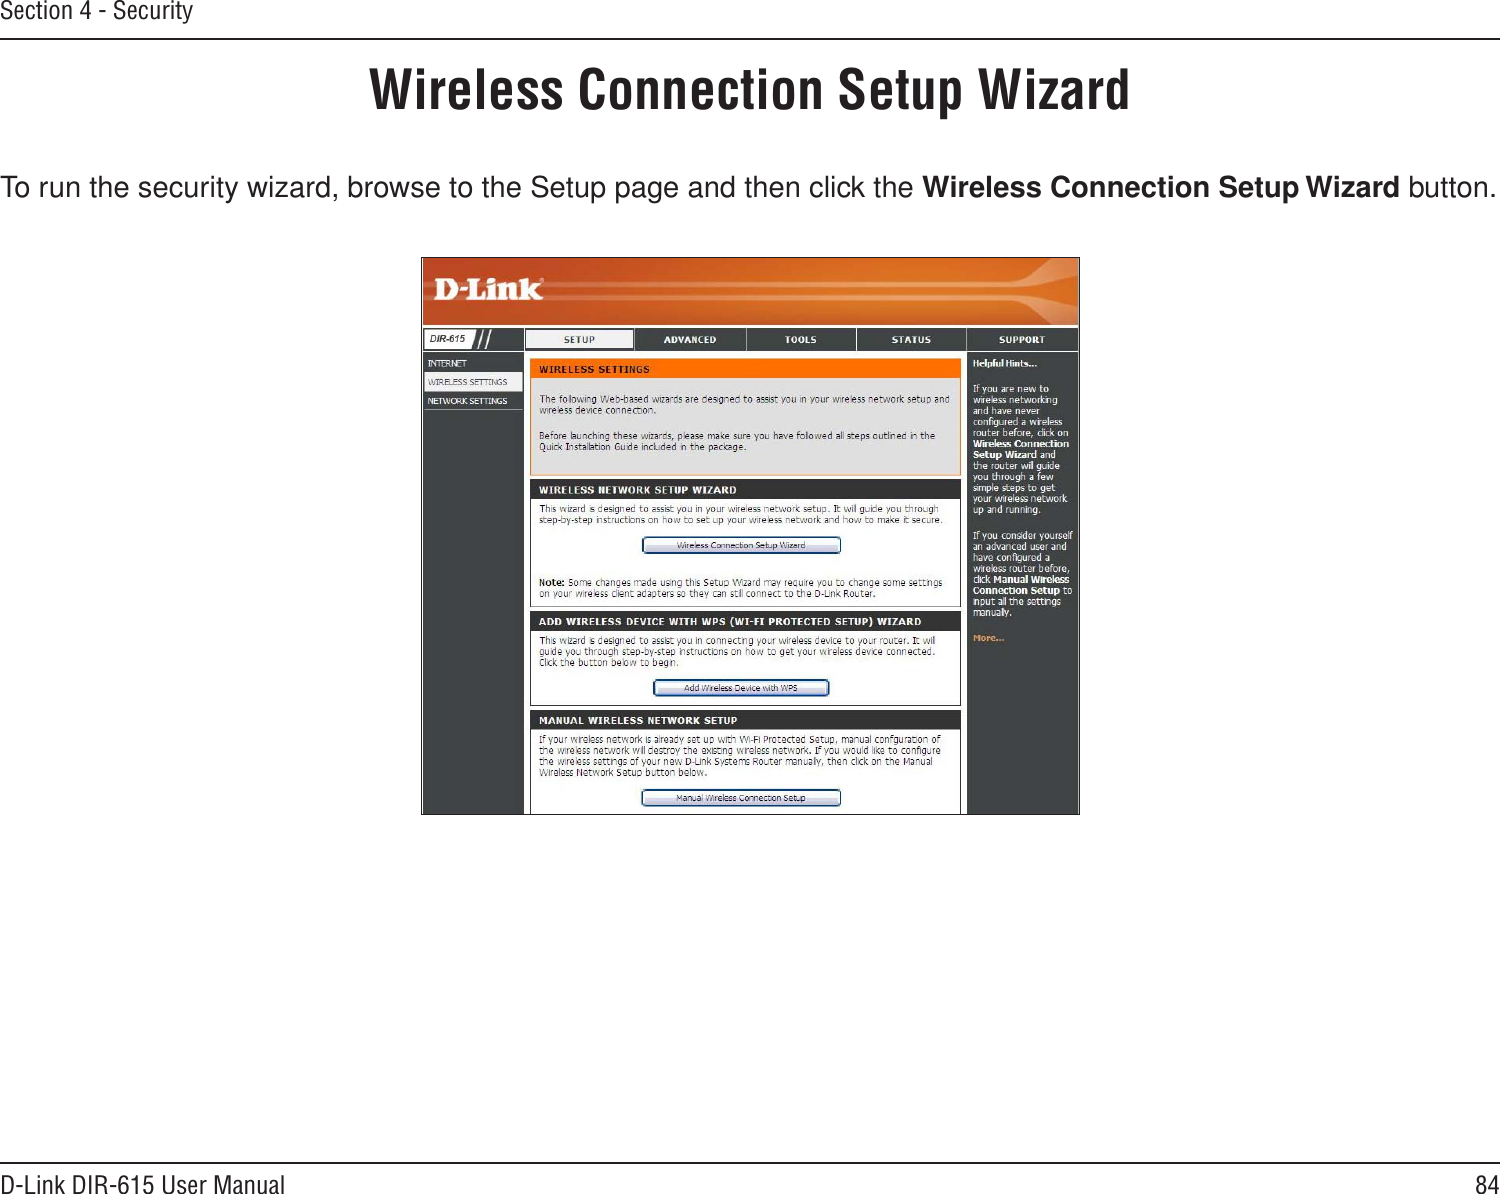 84D-Link DIR-615 User ManualSection 4 - SecurityWireless Connection Setup WizardTo run the security wizard, browse to the Setup page and then click the Wireless Connection Setup Wizard button. 